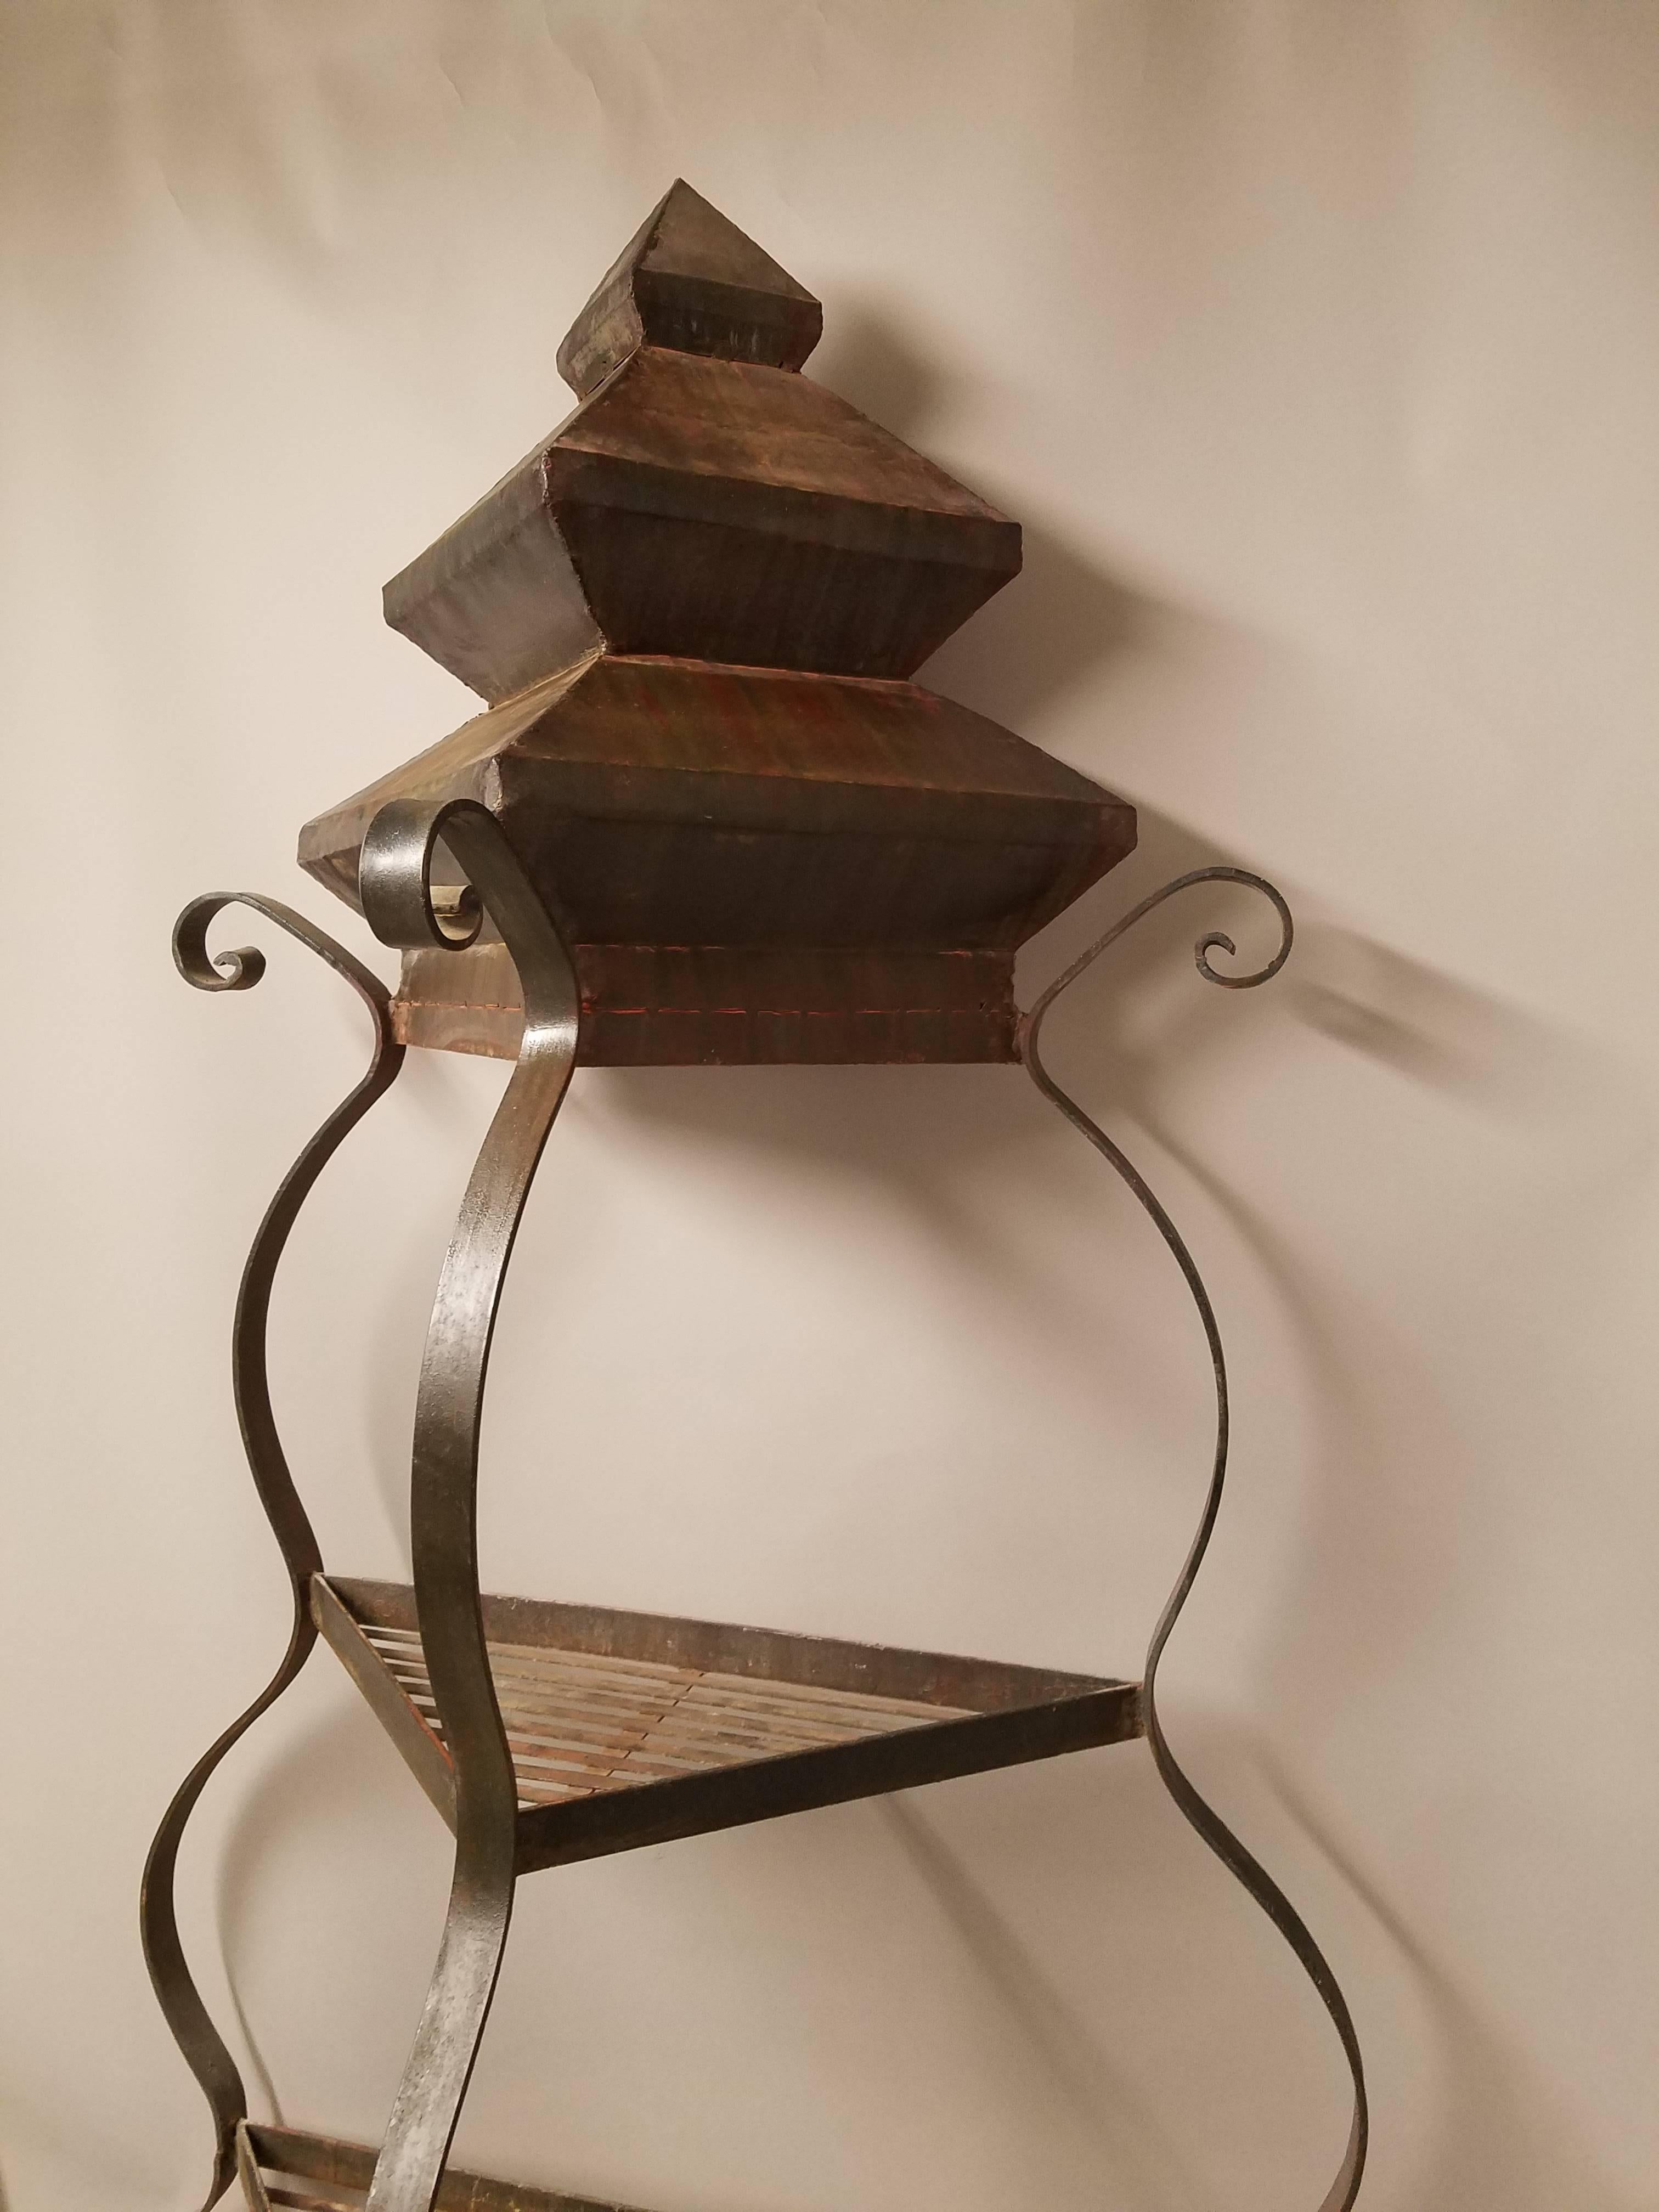 Three triangular shelves on a scrolling frame. Natural oxidation. Can be used indoors or outside for plants or display of objects. Top is a chic pagoda of steel.